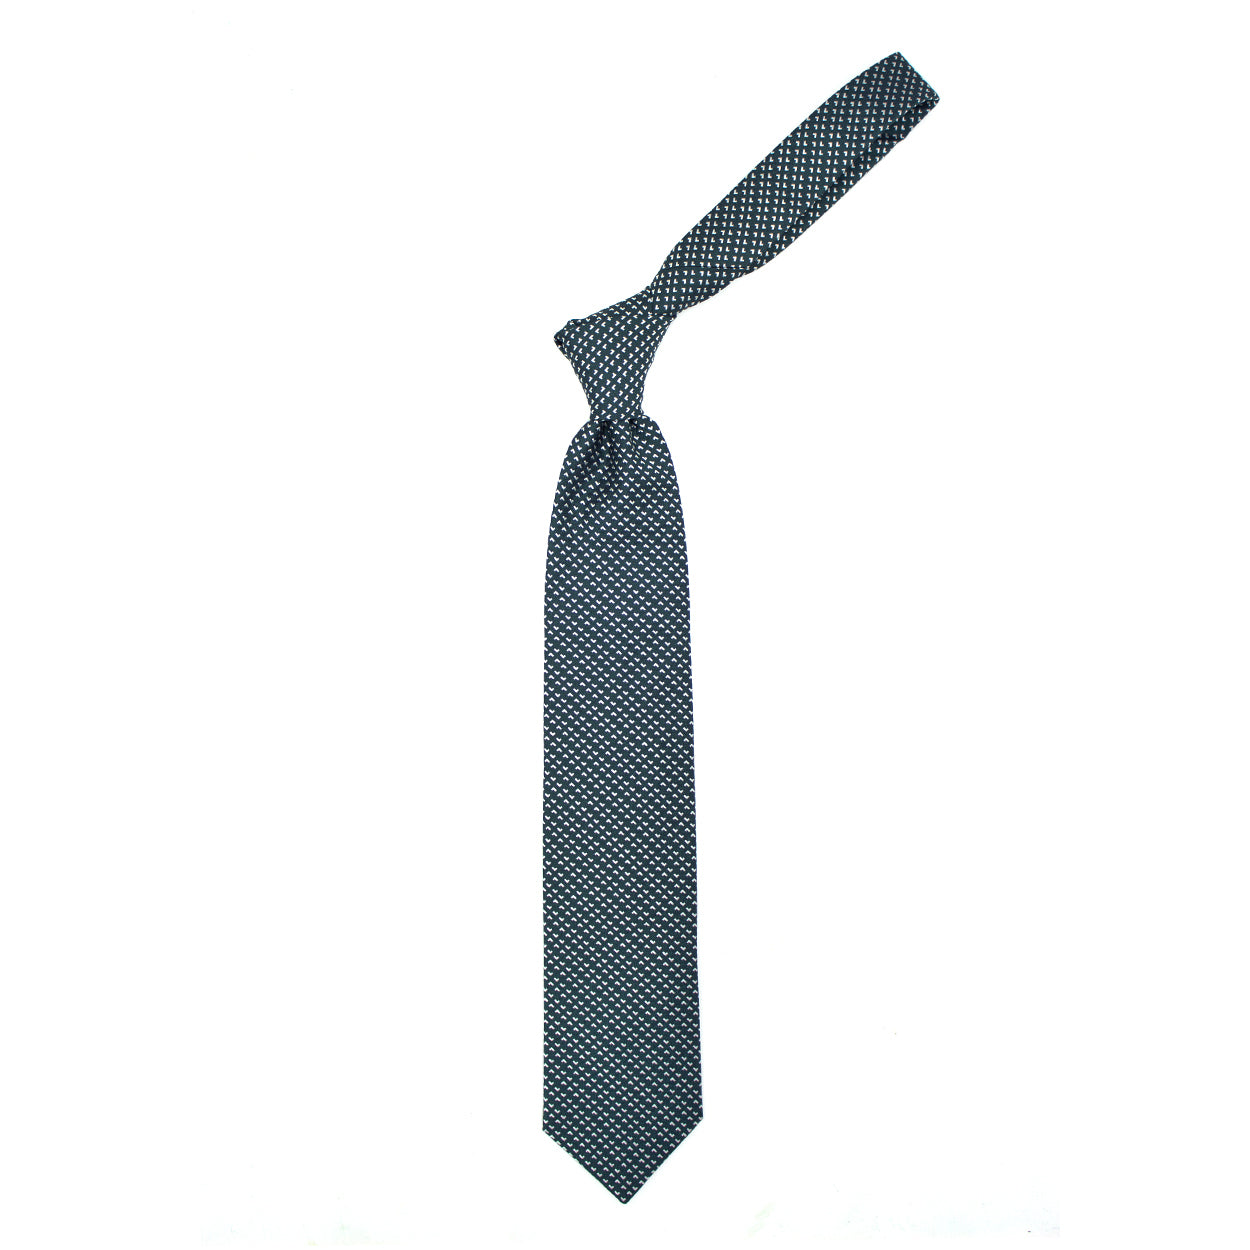 Green tie with white geometric pattern